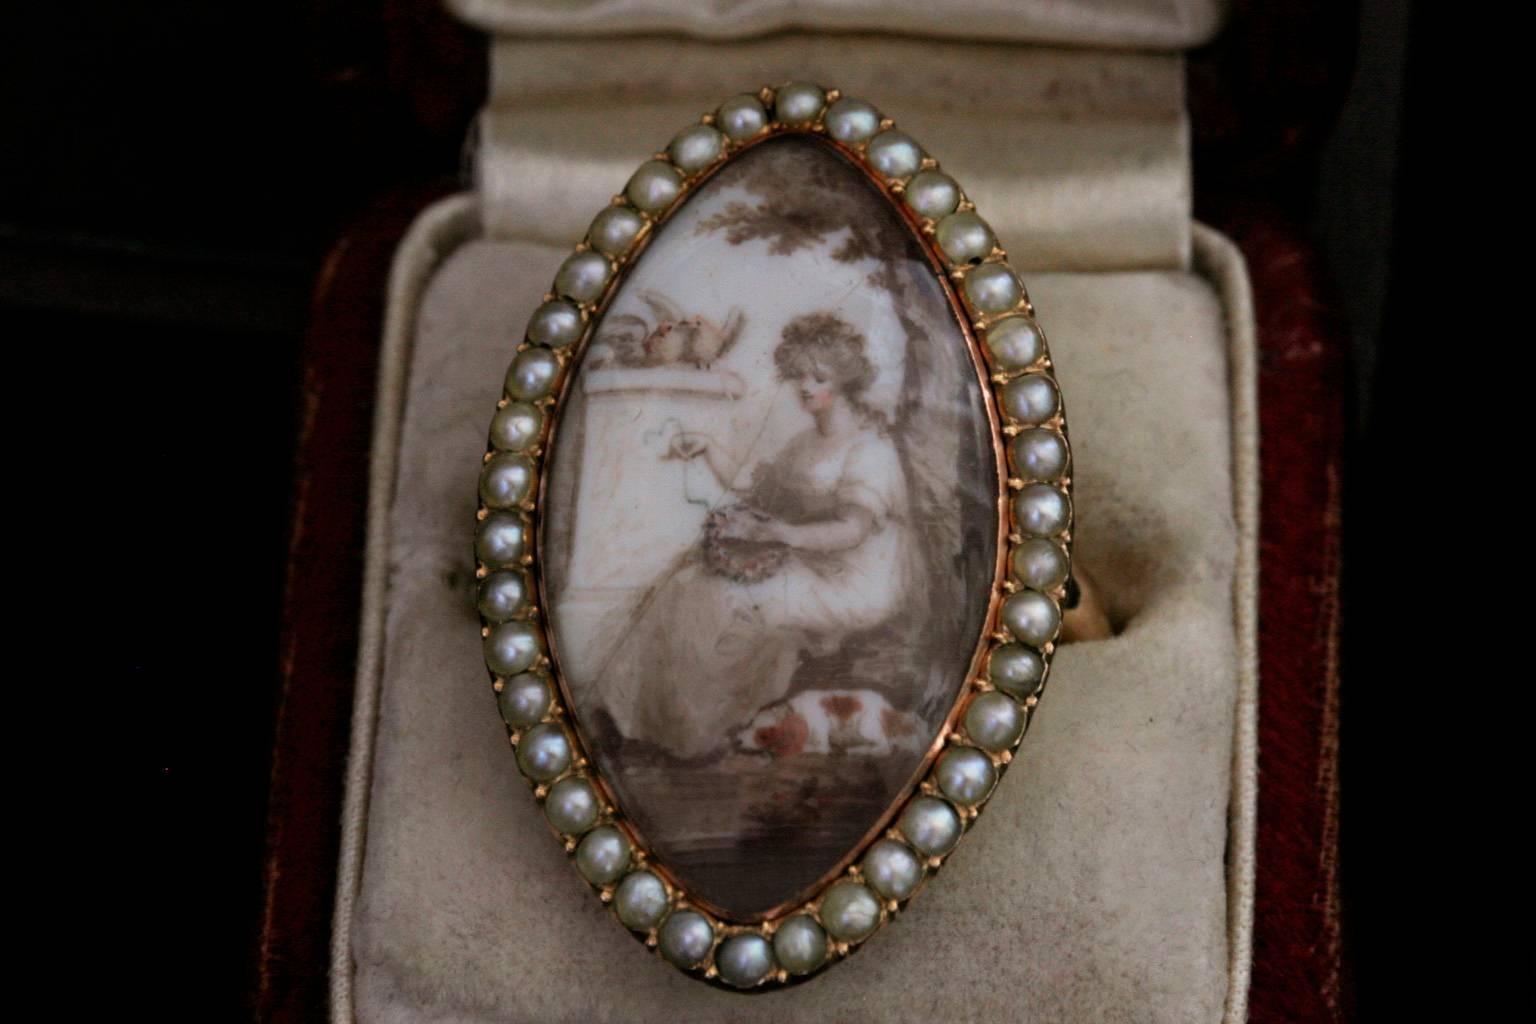 C.1800.  English in origin. This sepia miniature is made with a row of lustrous seed pearls around the navette-shaped glazed locket compartment. The miniature painting is depicting a maiden in mourning. She sits next to a plinth, accompanied by